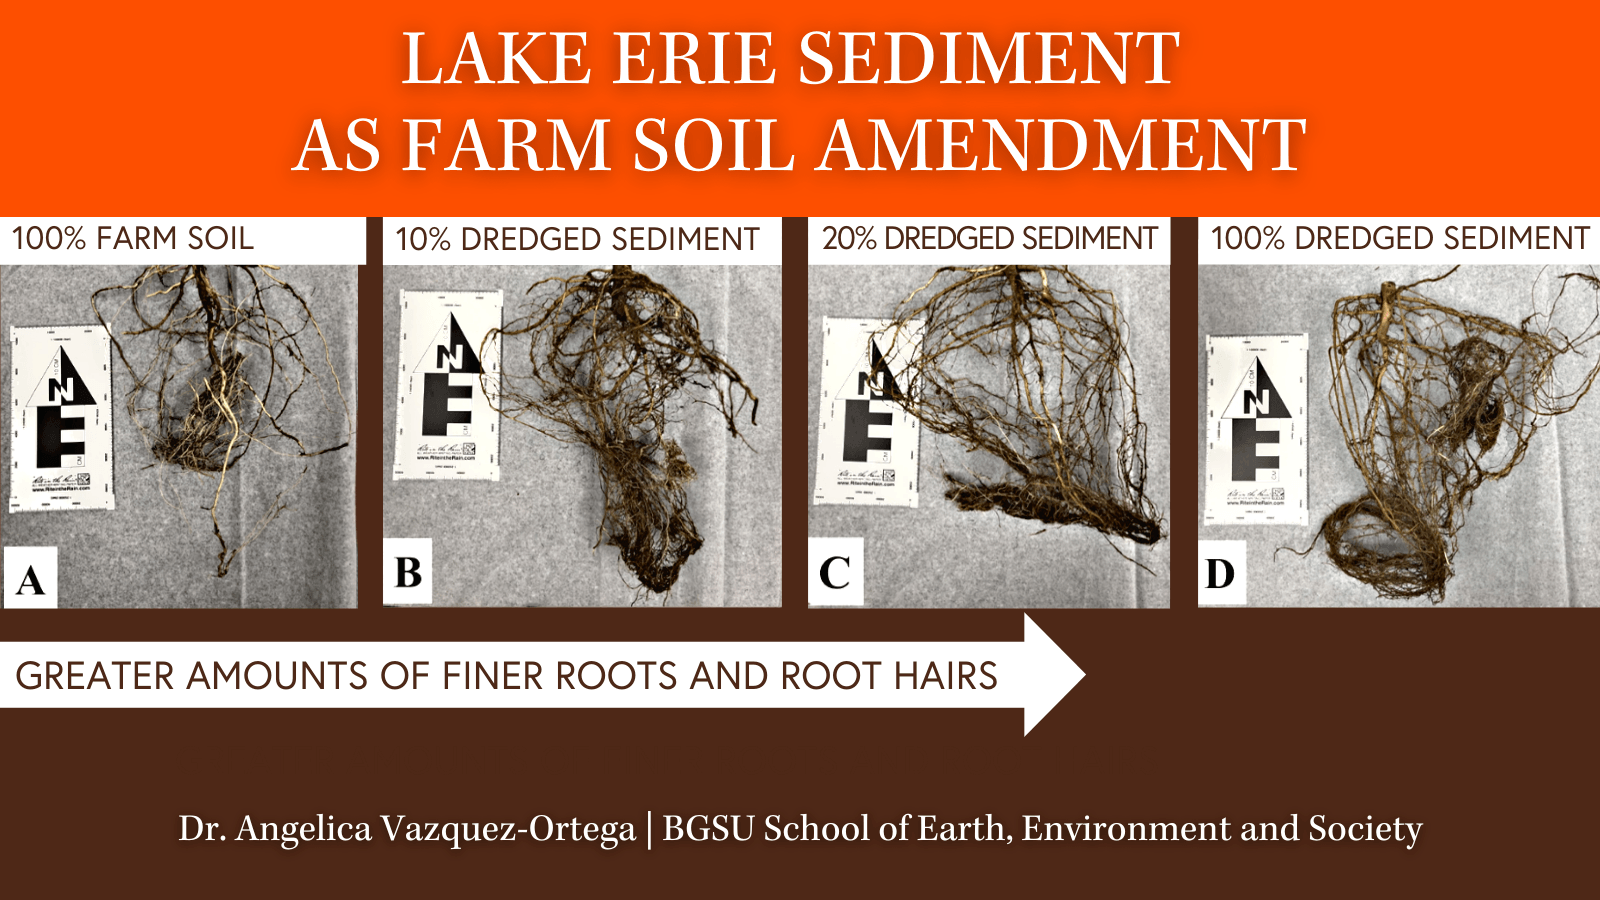 Infographic shows four sets of soybean root systems from left to right. The left-most soybean plant had no dredge applied and has a small root system. A second soybean plant had 10% dredged sediment applied and has a larger root system. A third soybean plant had 20% dredged sediment applied and has an even larger root system. A fourth soybean plant had 100% dredged sediment applied and has the largest root system of the four. 